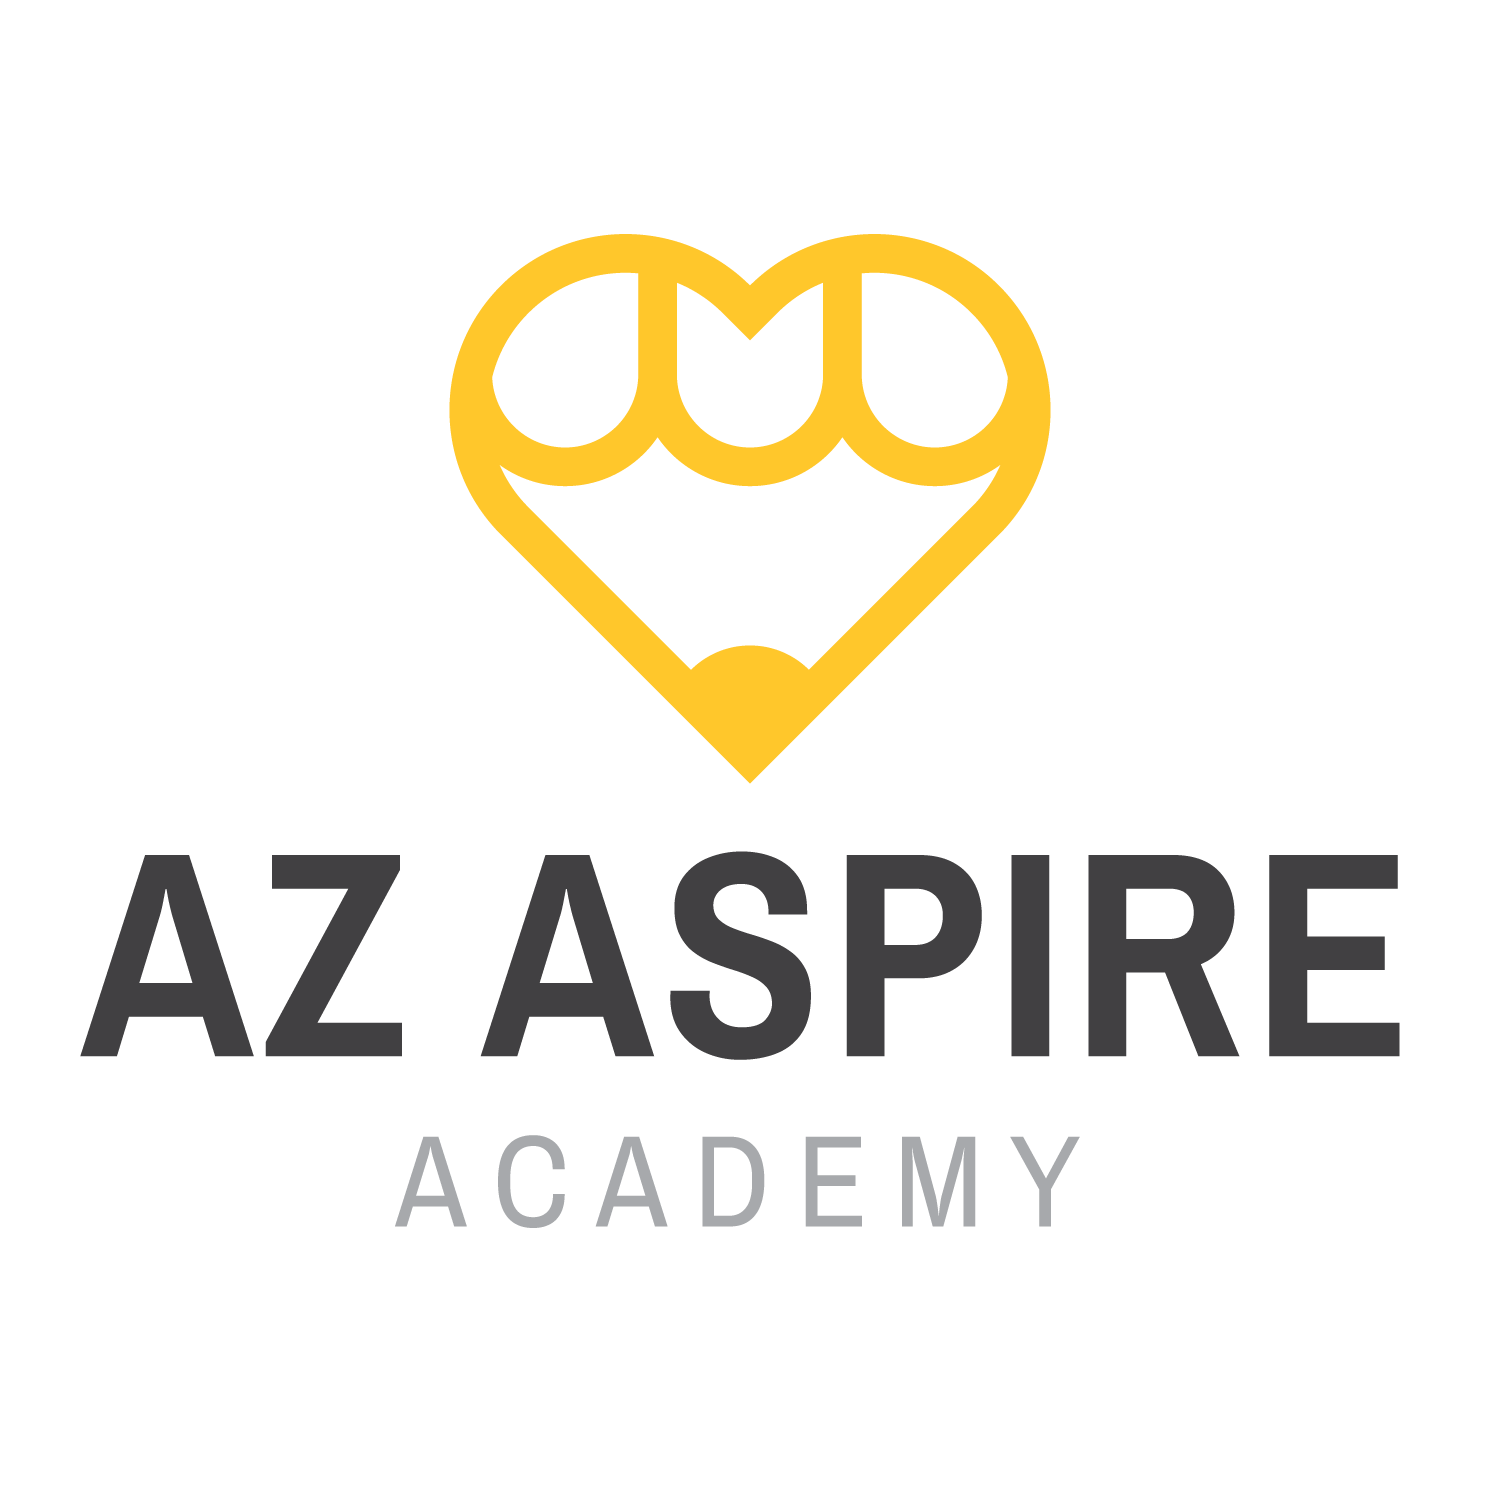 The AZ Aspire Academy Logo: A graphic of a yellow heart with eraser at the top signifying a pencil heart